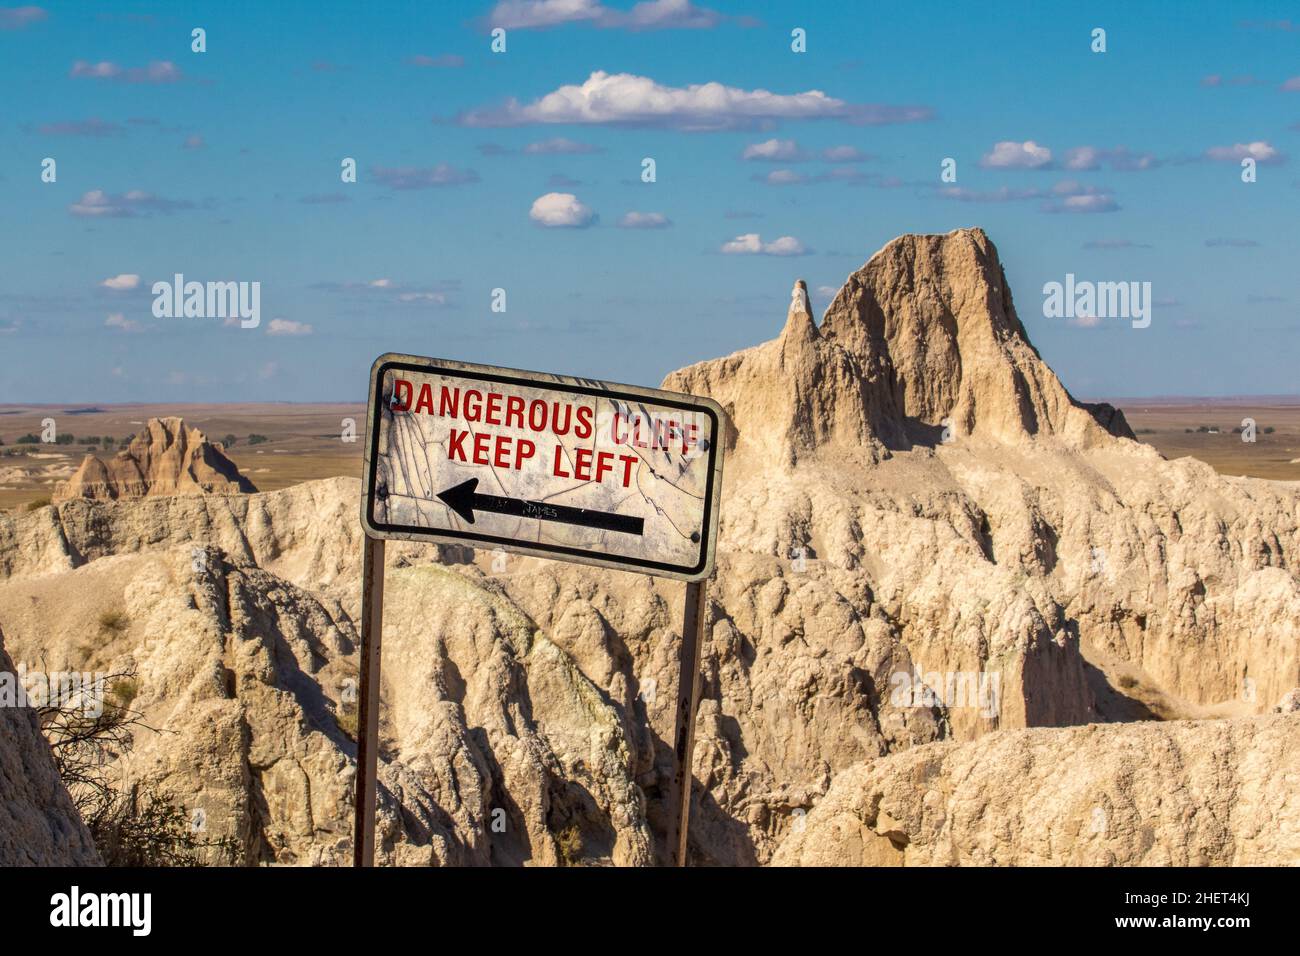 Danger Ahead Keep Left sign on a cliff in the Badlands in South Dakota, USA Stock Photo